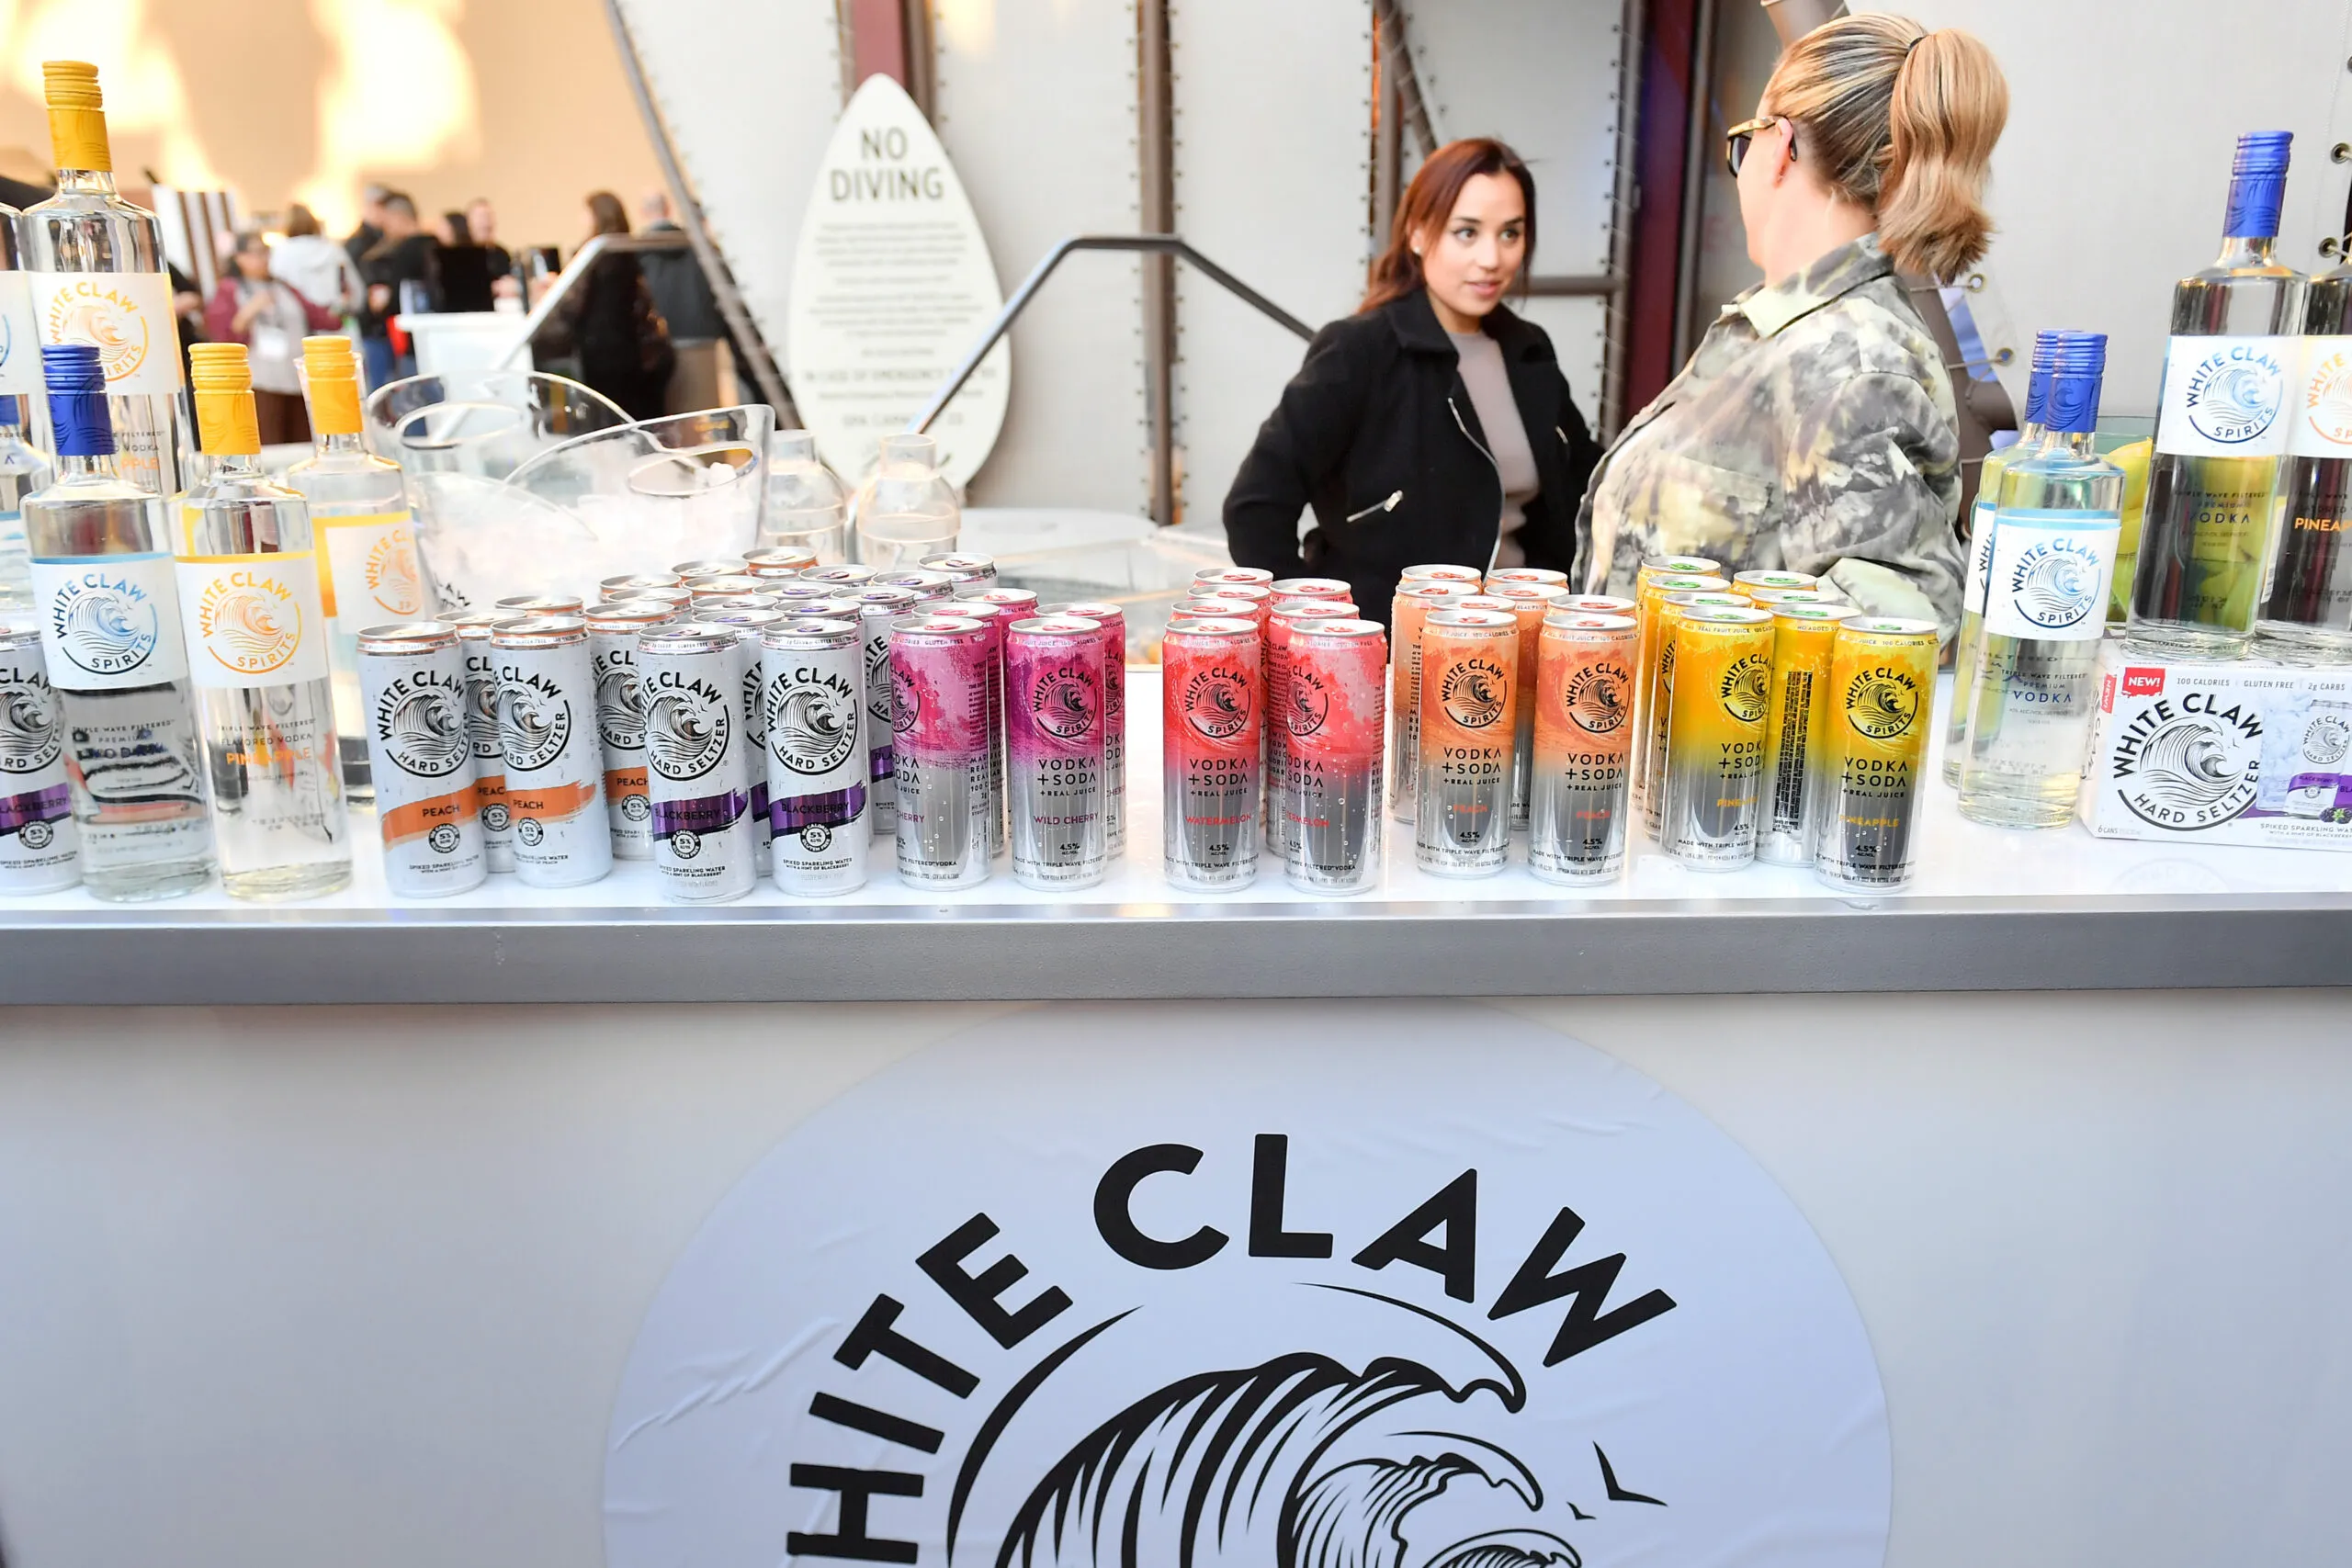 LAS VEGAS, NEVADA - MARCH 27: White Claw seltzers on display at the 2023 Bar & Restaurant Expo and World Tea Expo Welcome Kickoff Party at AYU Dayclub at Resorts World Las Vegas on March 27, 2023 in Las Vegas, Nevada. (Photo by Bryan Steffy/Getty Images for Nightclub & Bar Media Group)